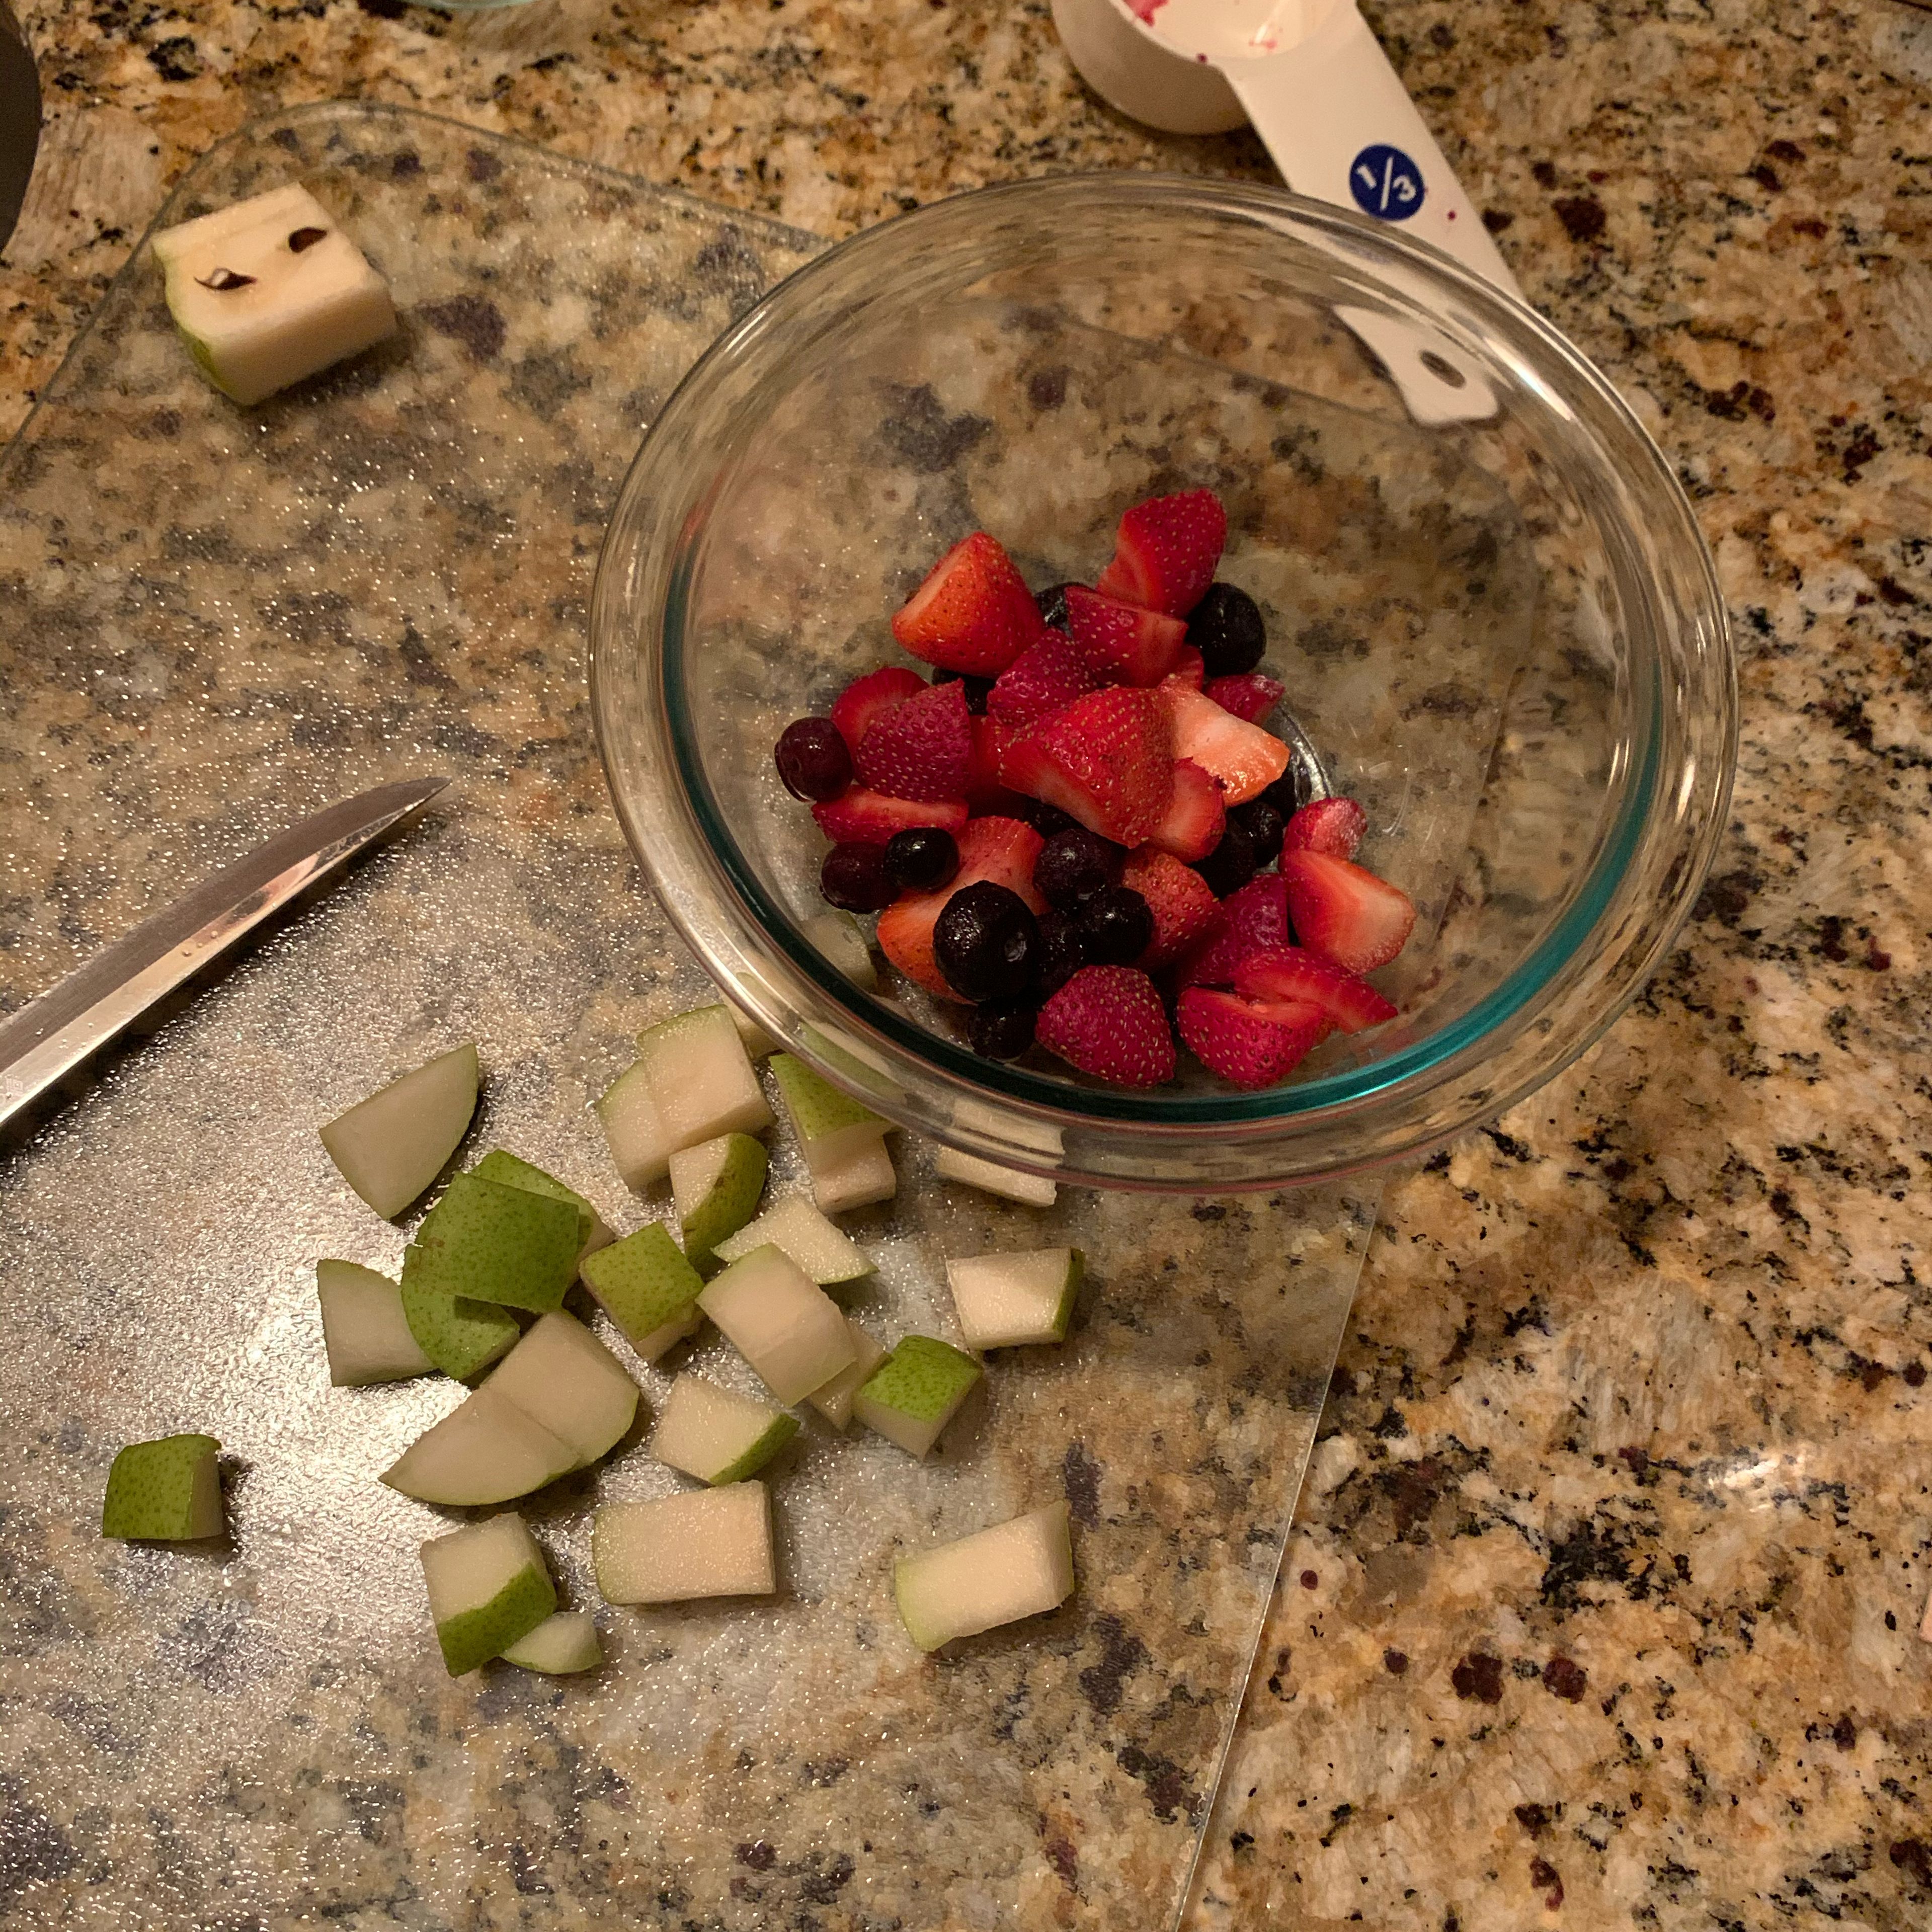 Cut half of pear into cubes and add to fruit mixture.